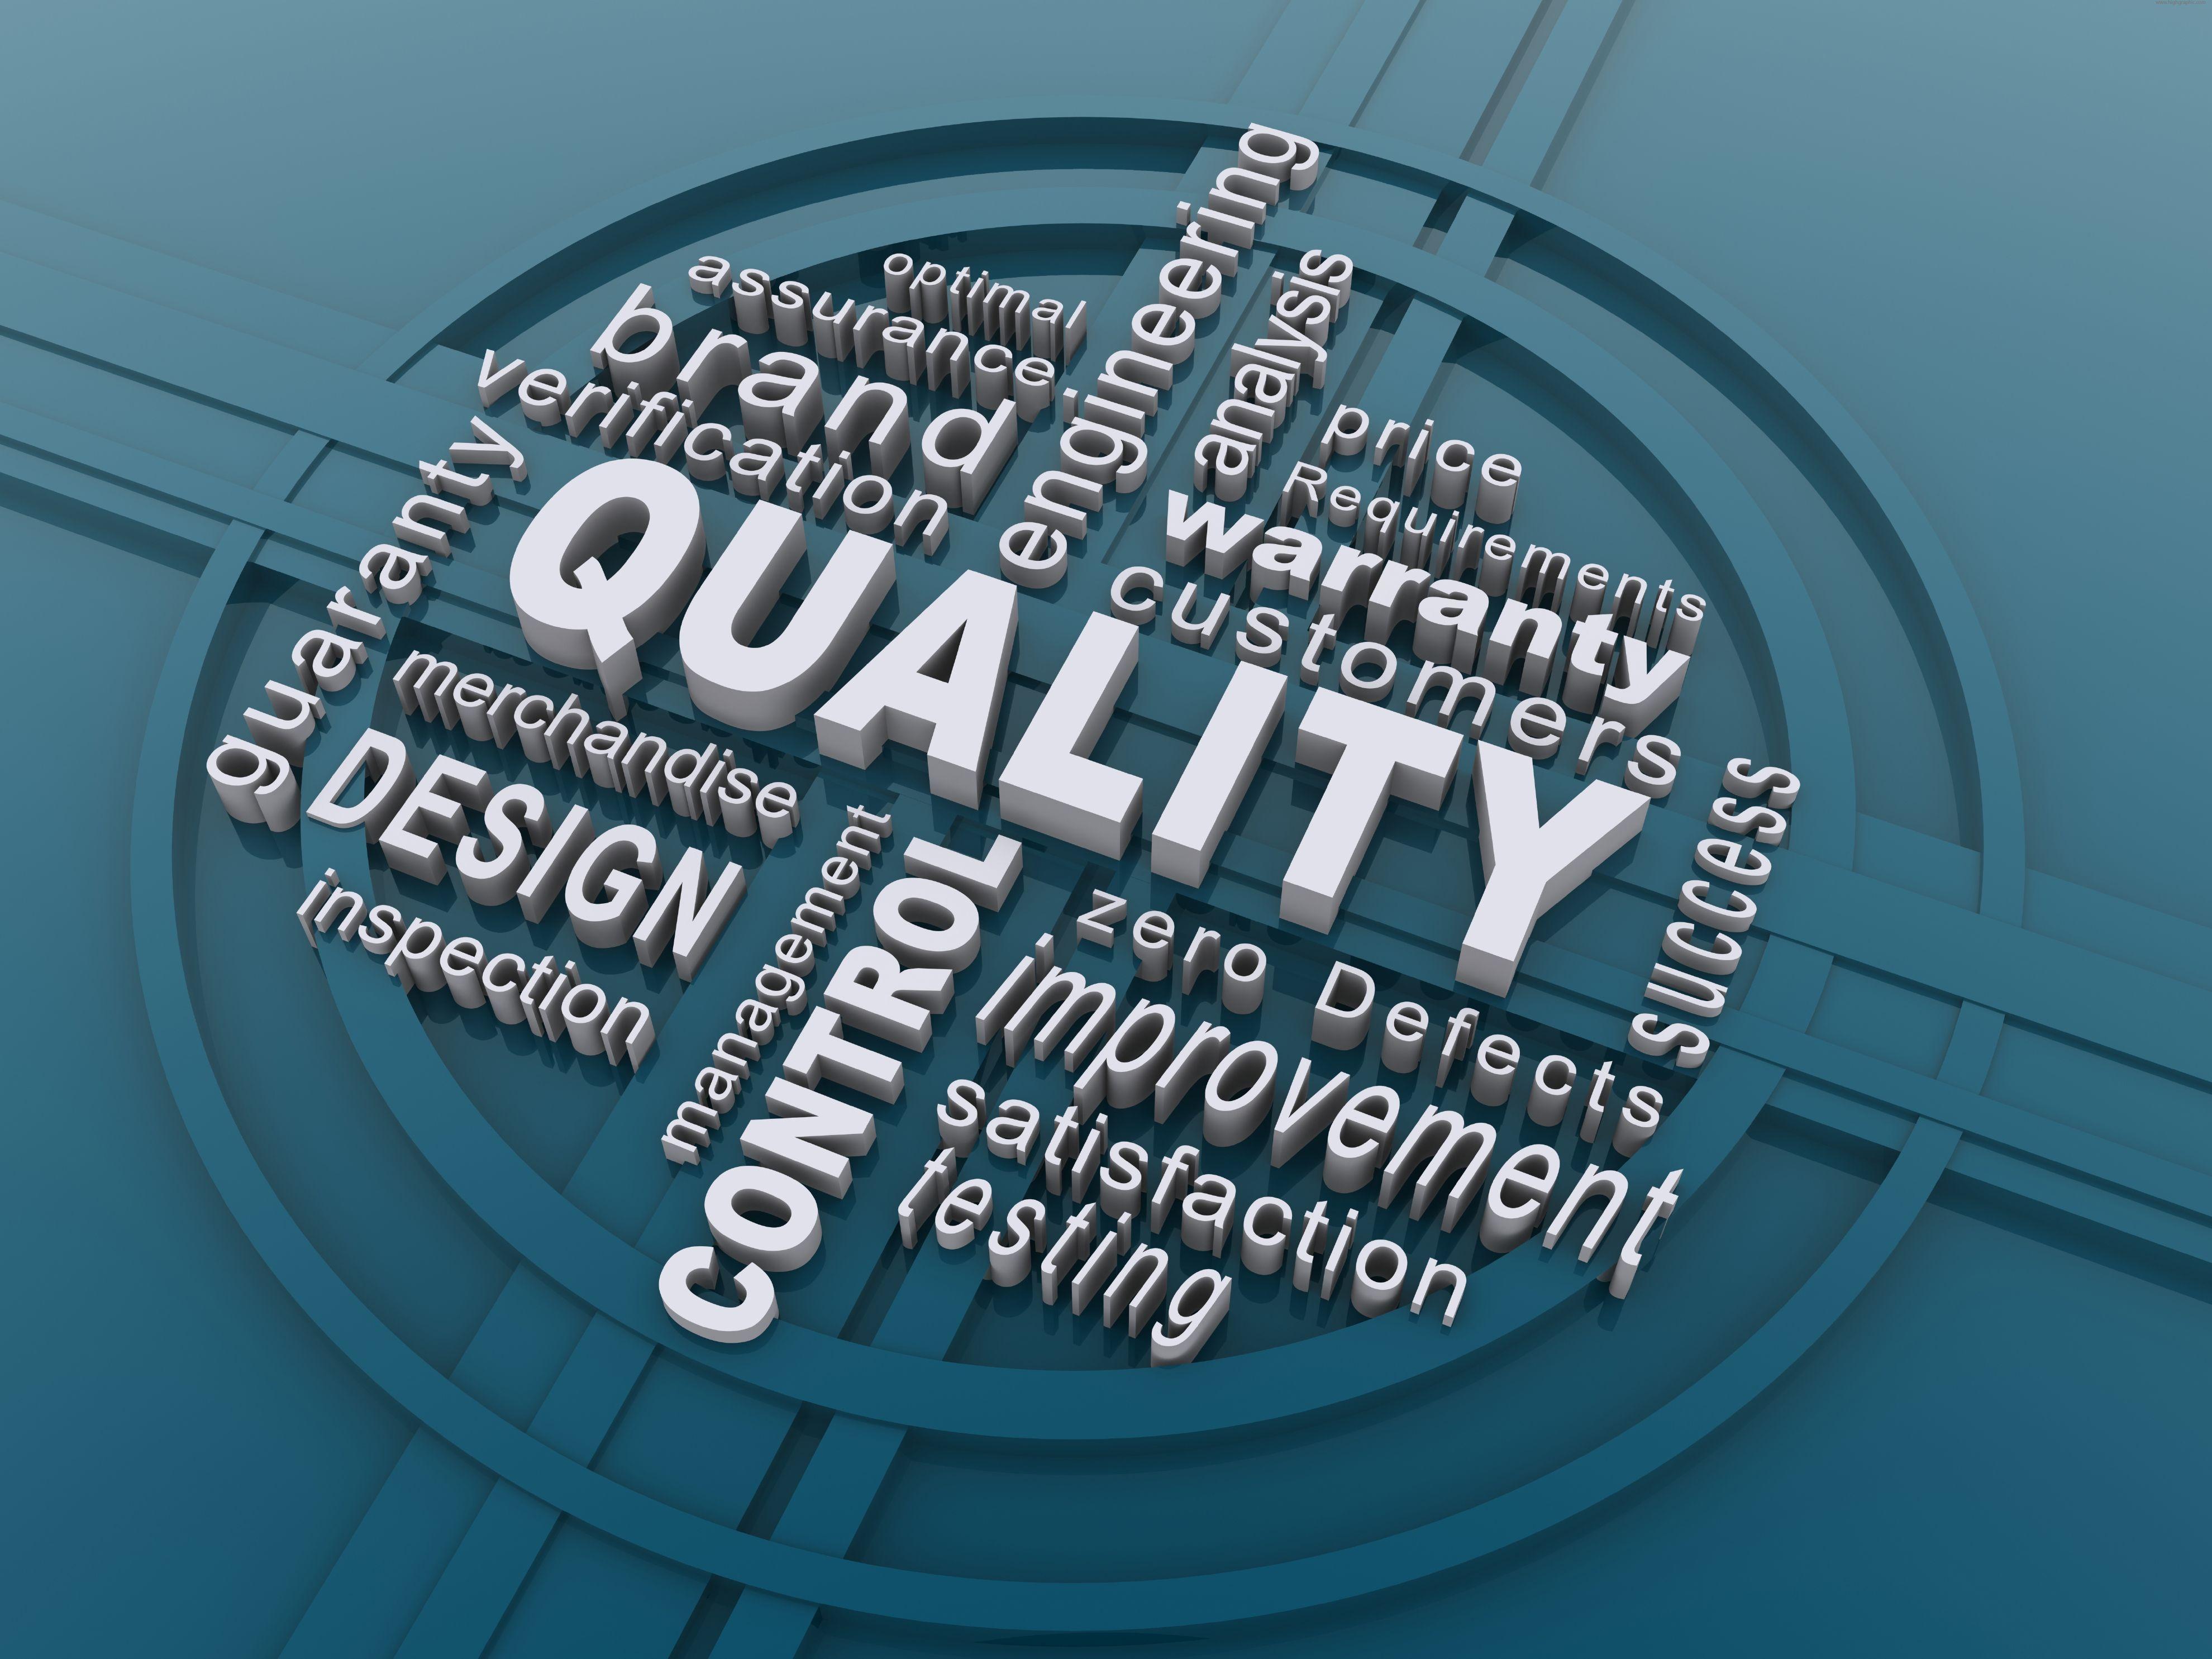 How to incorporate QA into software development process?